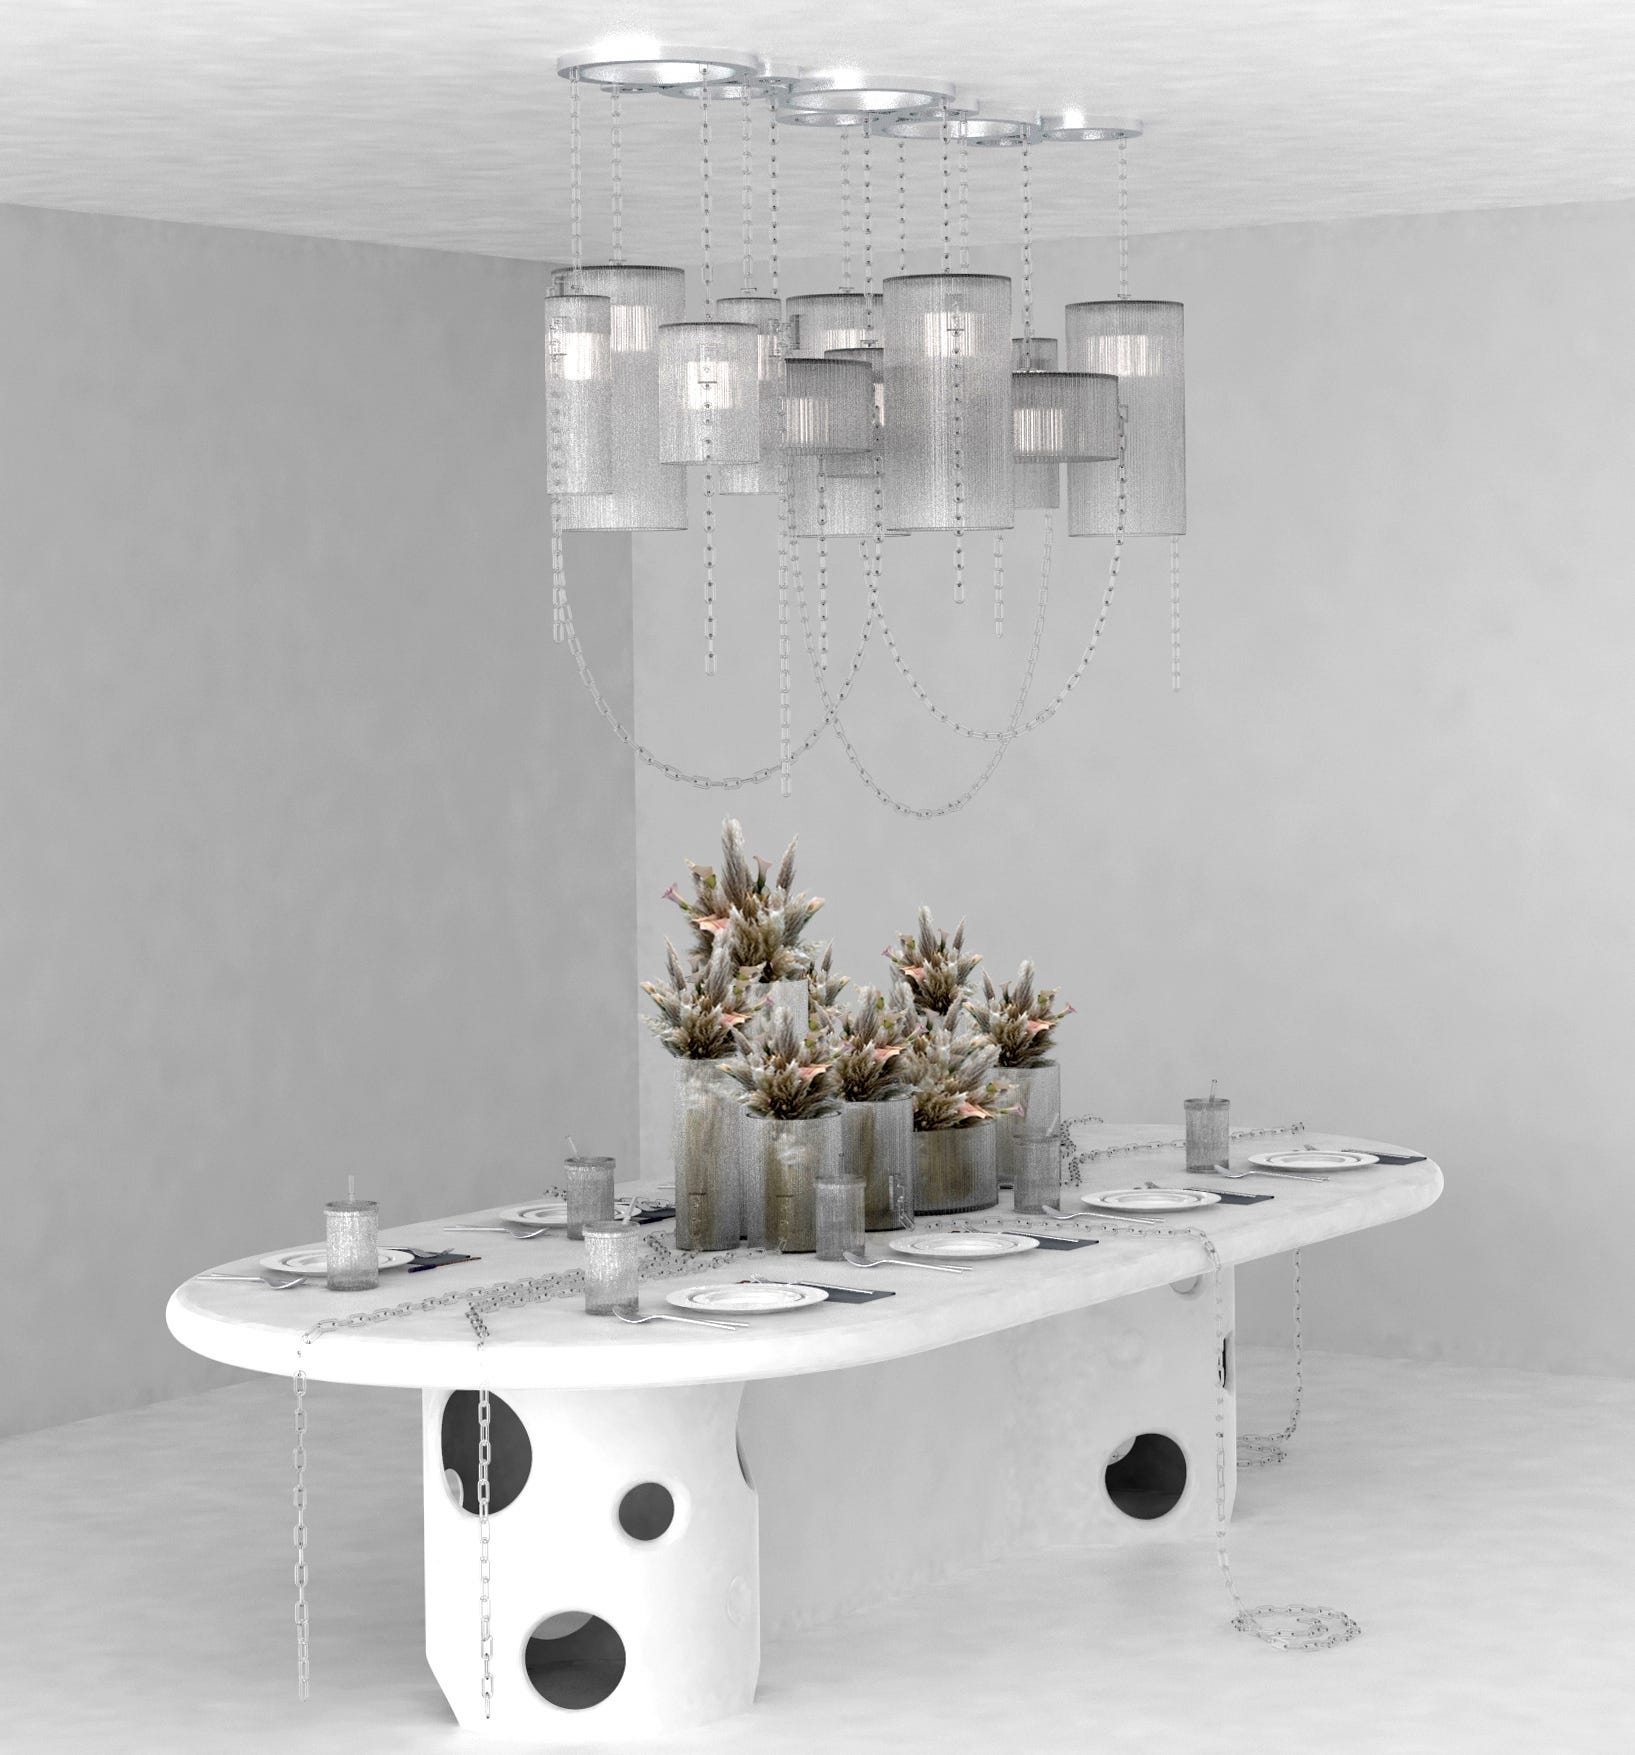 Virgil Abloh designed an elegant limited-edition Crystal Clear capsule collection for Baccarat, which debuted in the brand's new boutique bar and lounge during Design Miami week. Chandelier shades, vessels and drinking glasses are ribbed, with a frosty look, and the piece de resistance is the integration of crystal chains.